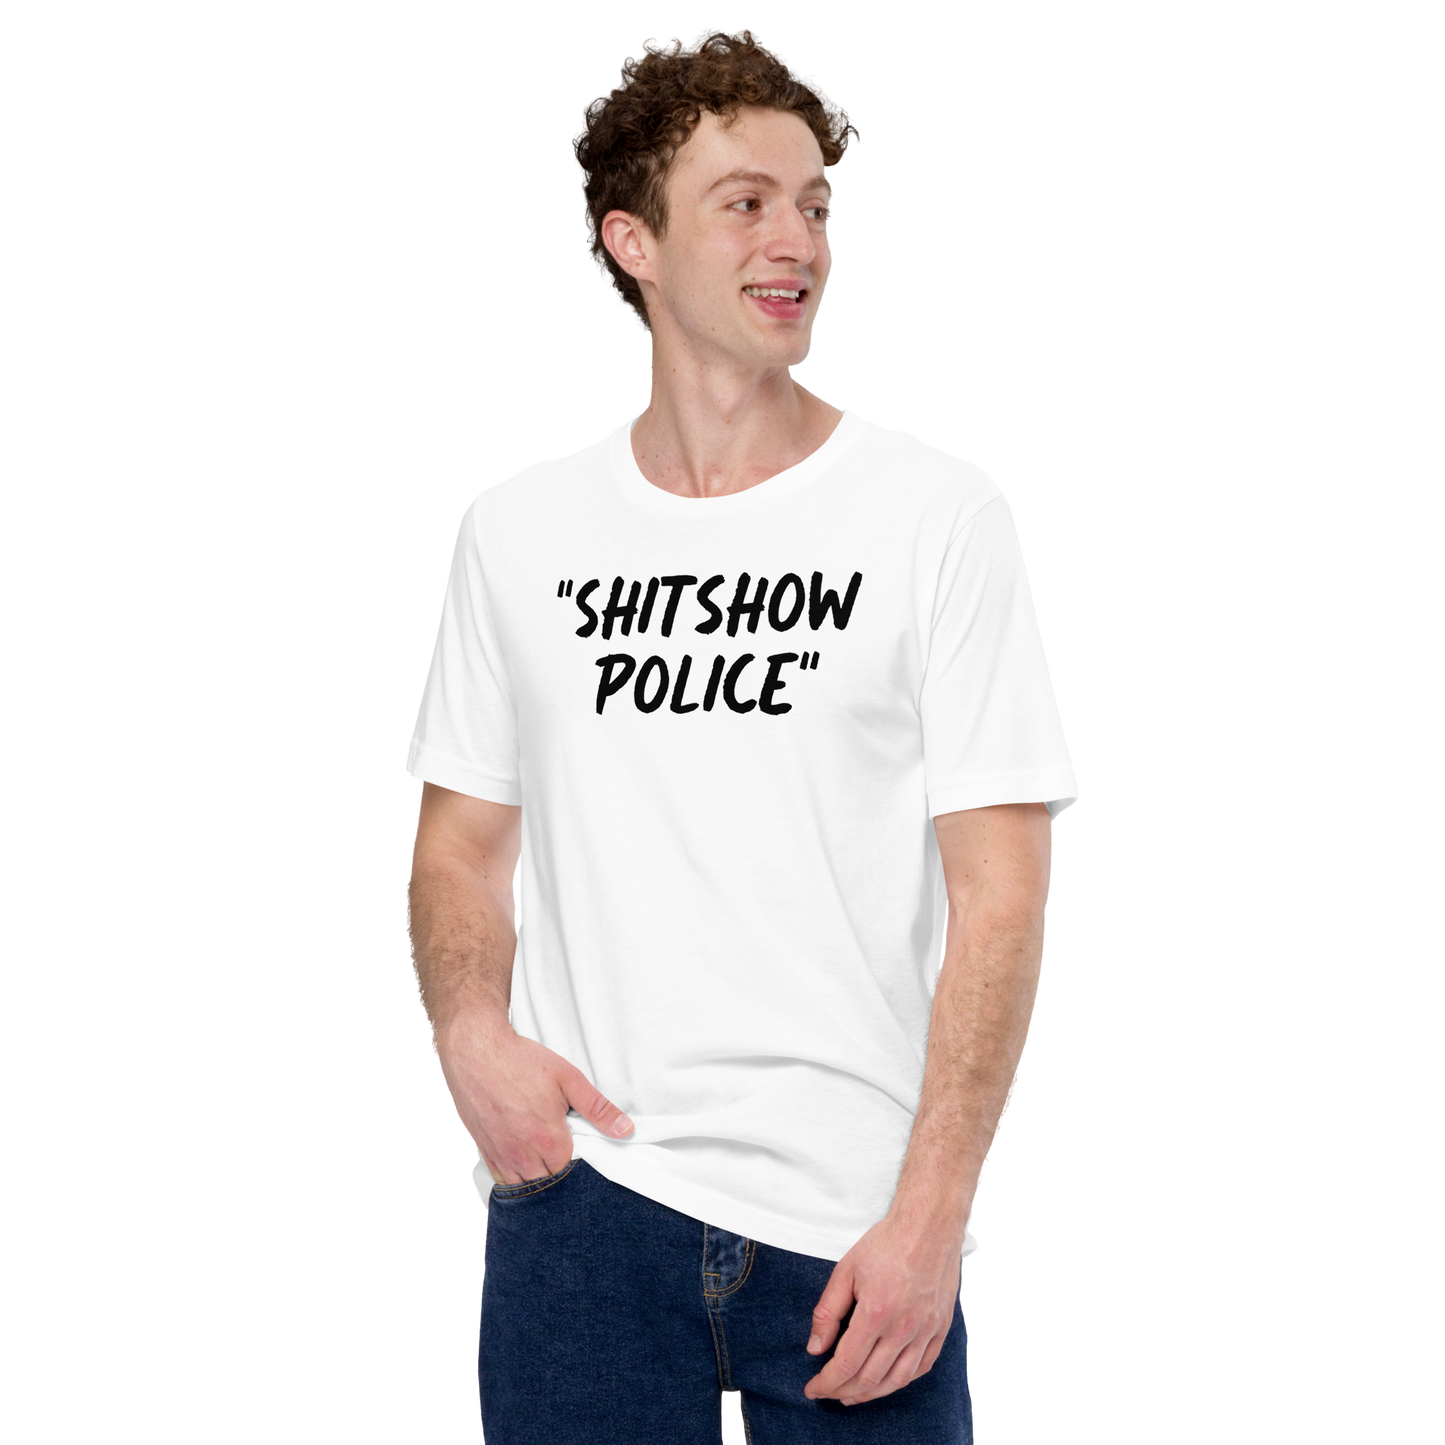 Police Show T-shirt